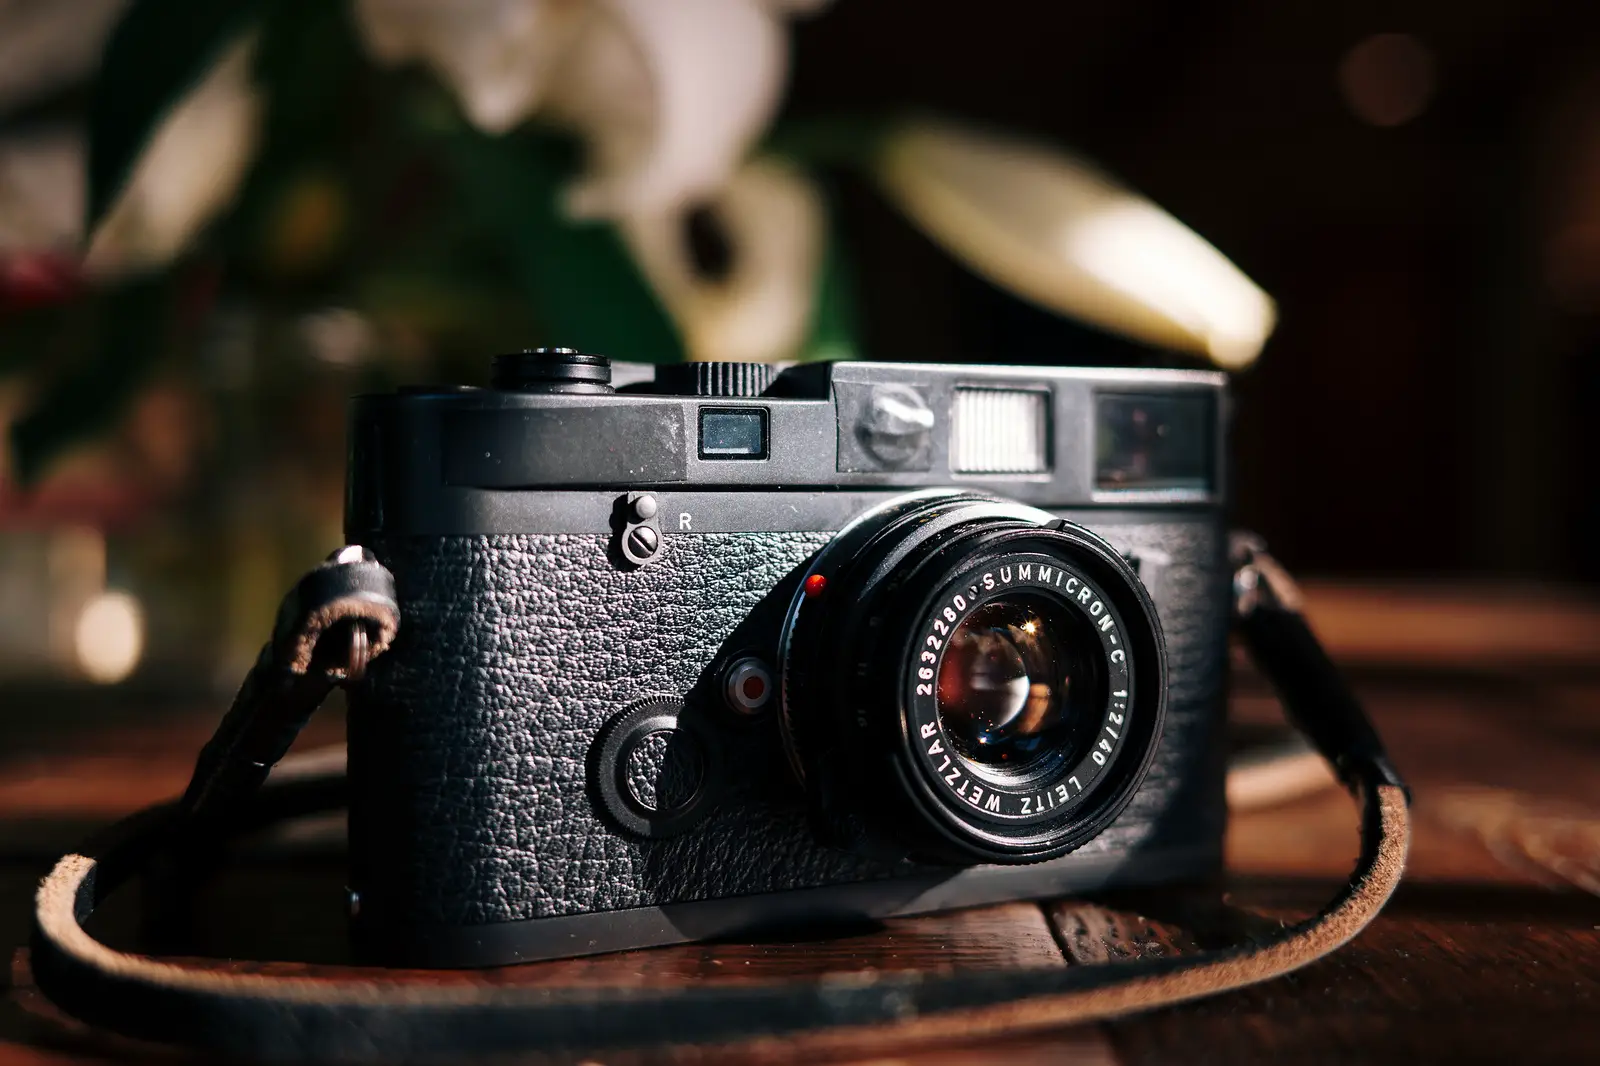 Leica M6 (yet another) Review - Is it worth the hype? - By Joe